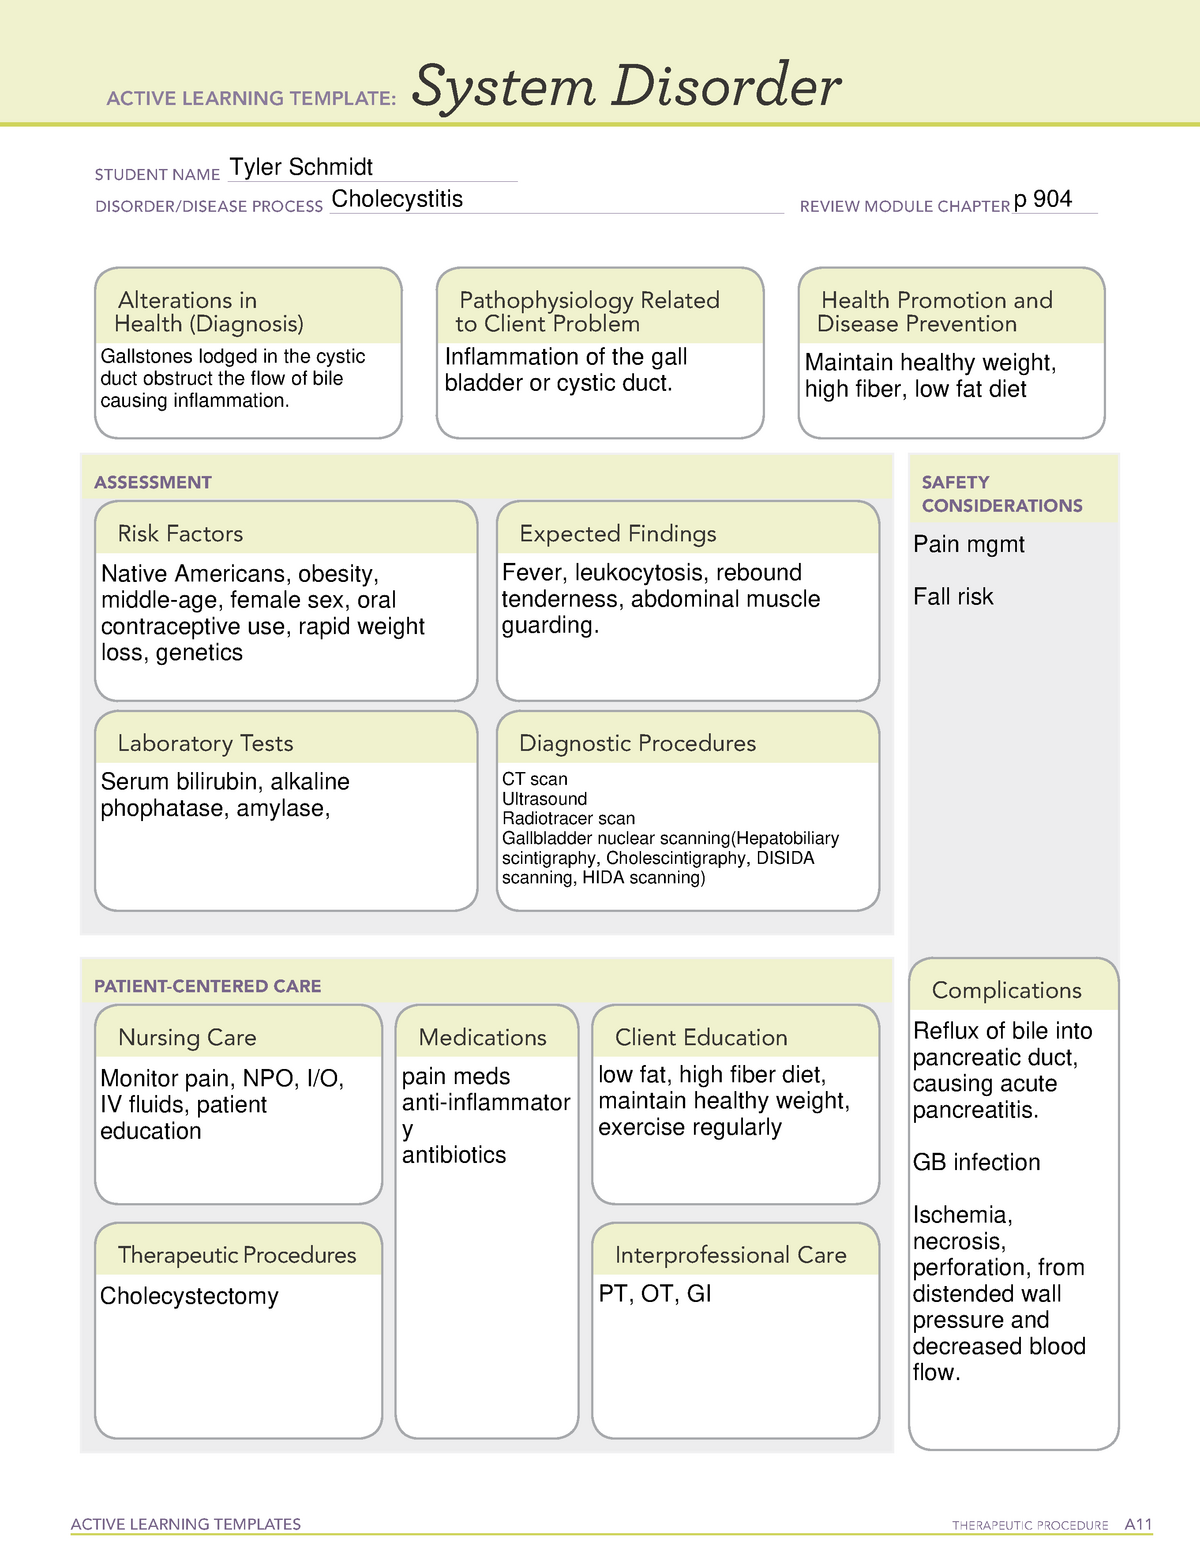 Cholecystitis system disorder ati active learning template ACTIVE